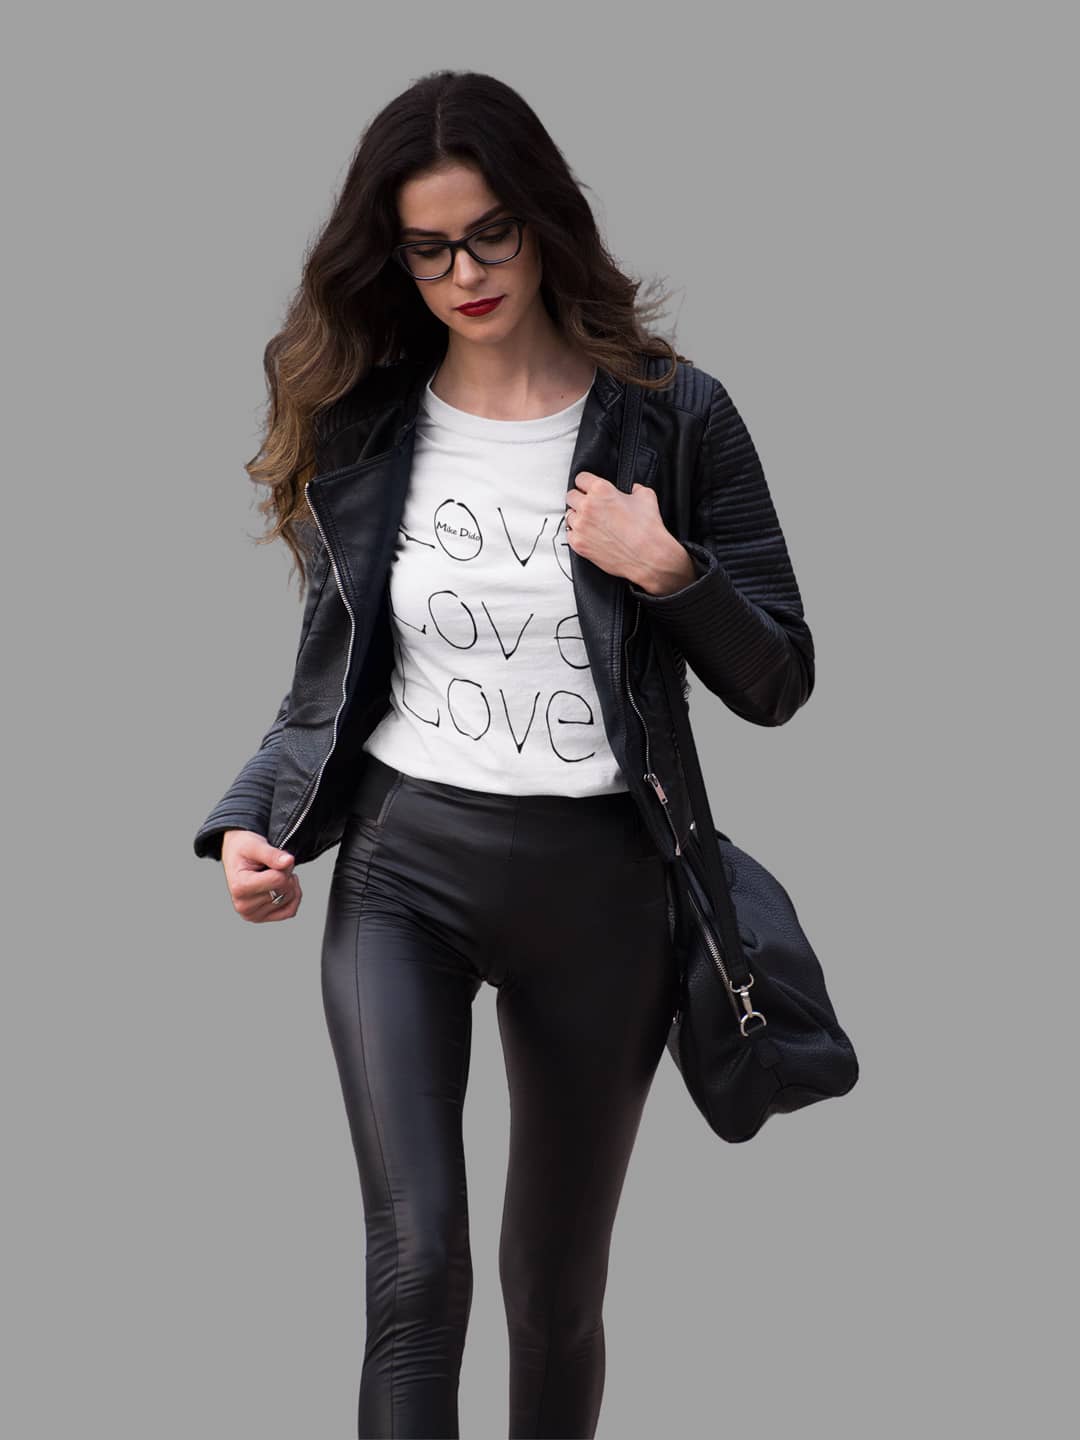 Love Slogan Cotton T-Shirt For Women And Men by Mike Dido